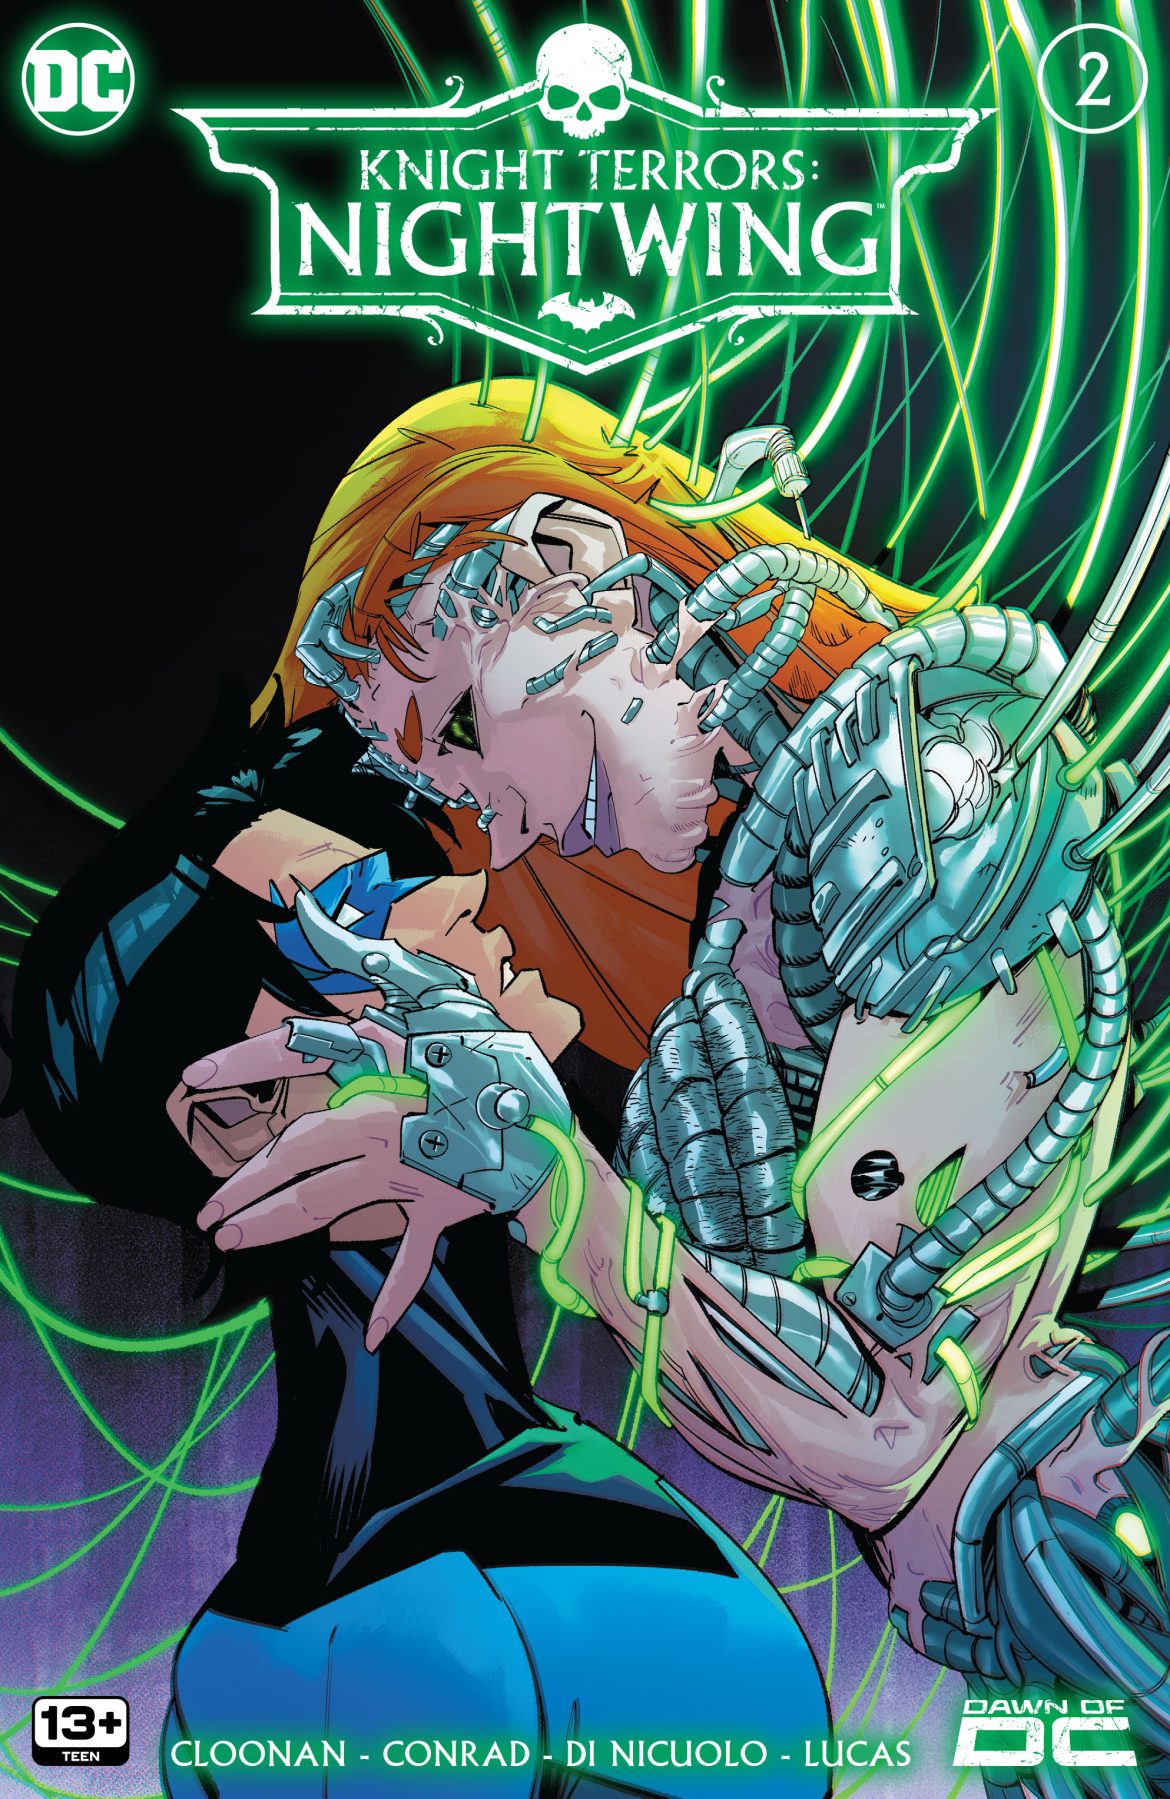 knight terrors nightwing #2 main cover